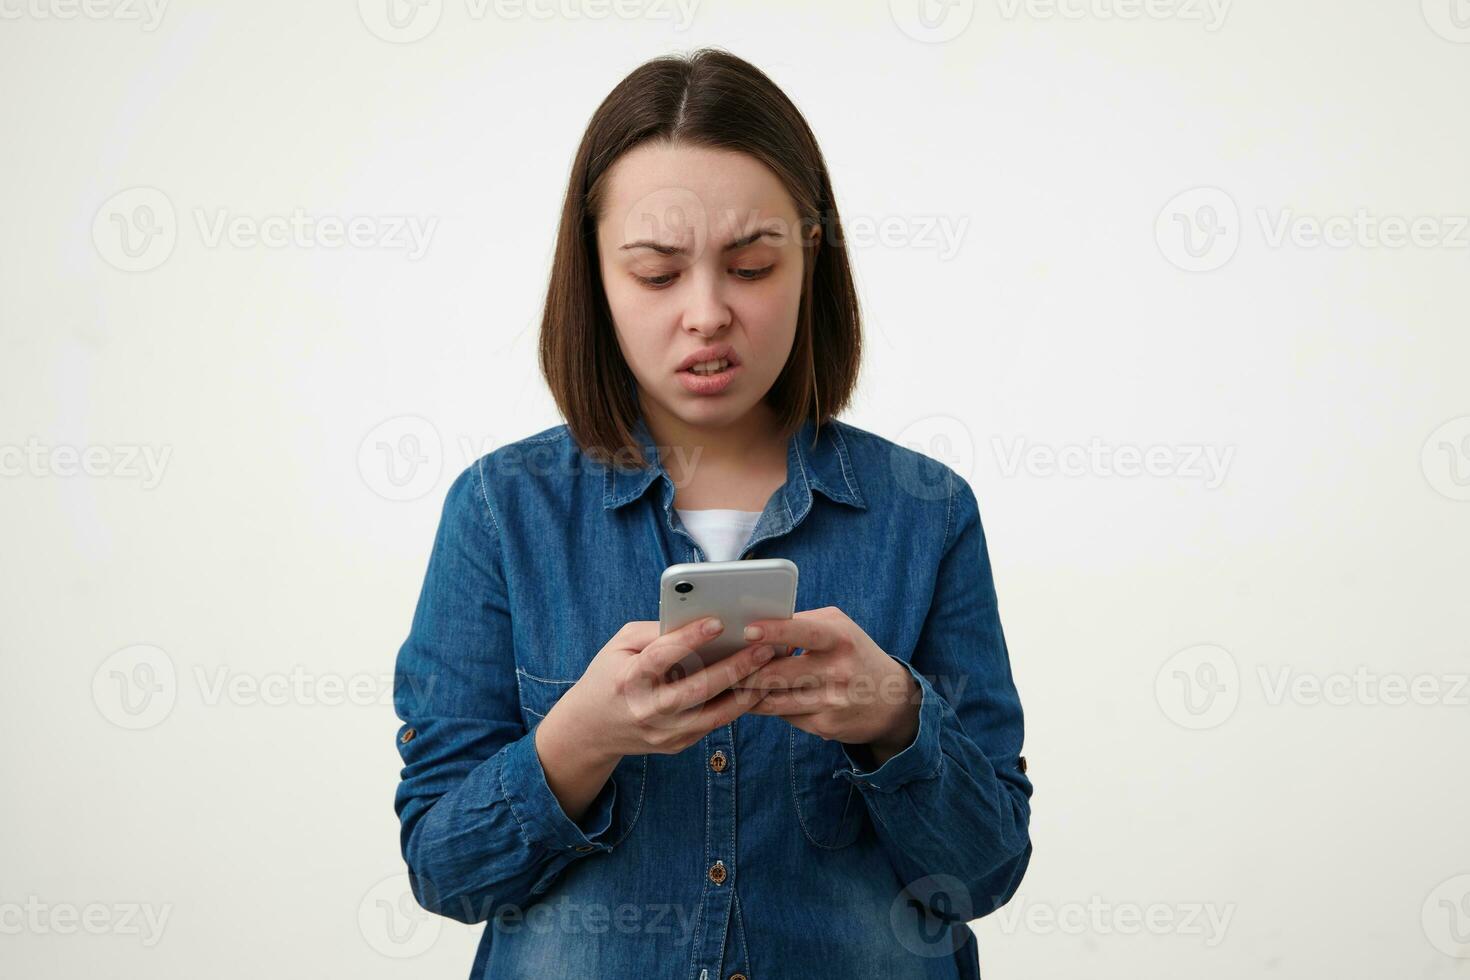 Studio shot of confused young brunette lady with short haircut twisting her mouth while reading message on her smartphone, standing over white background photo